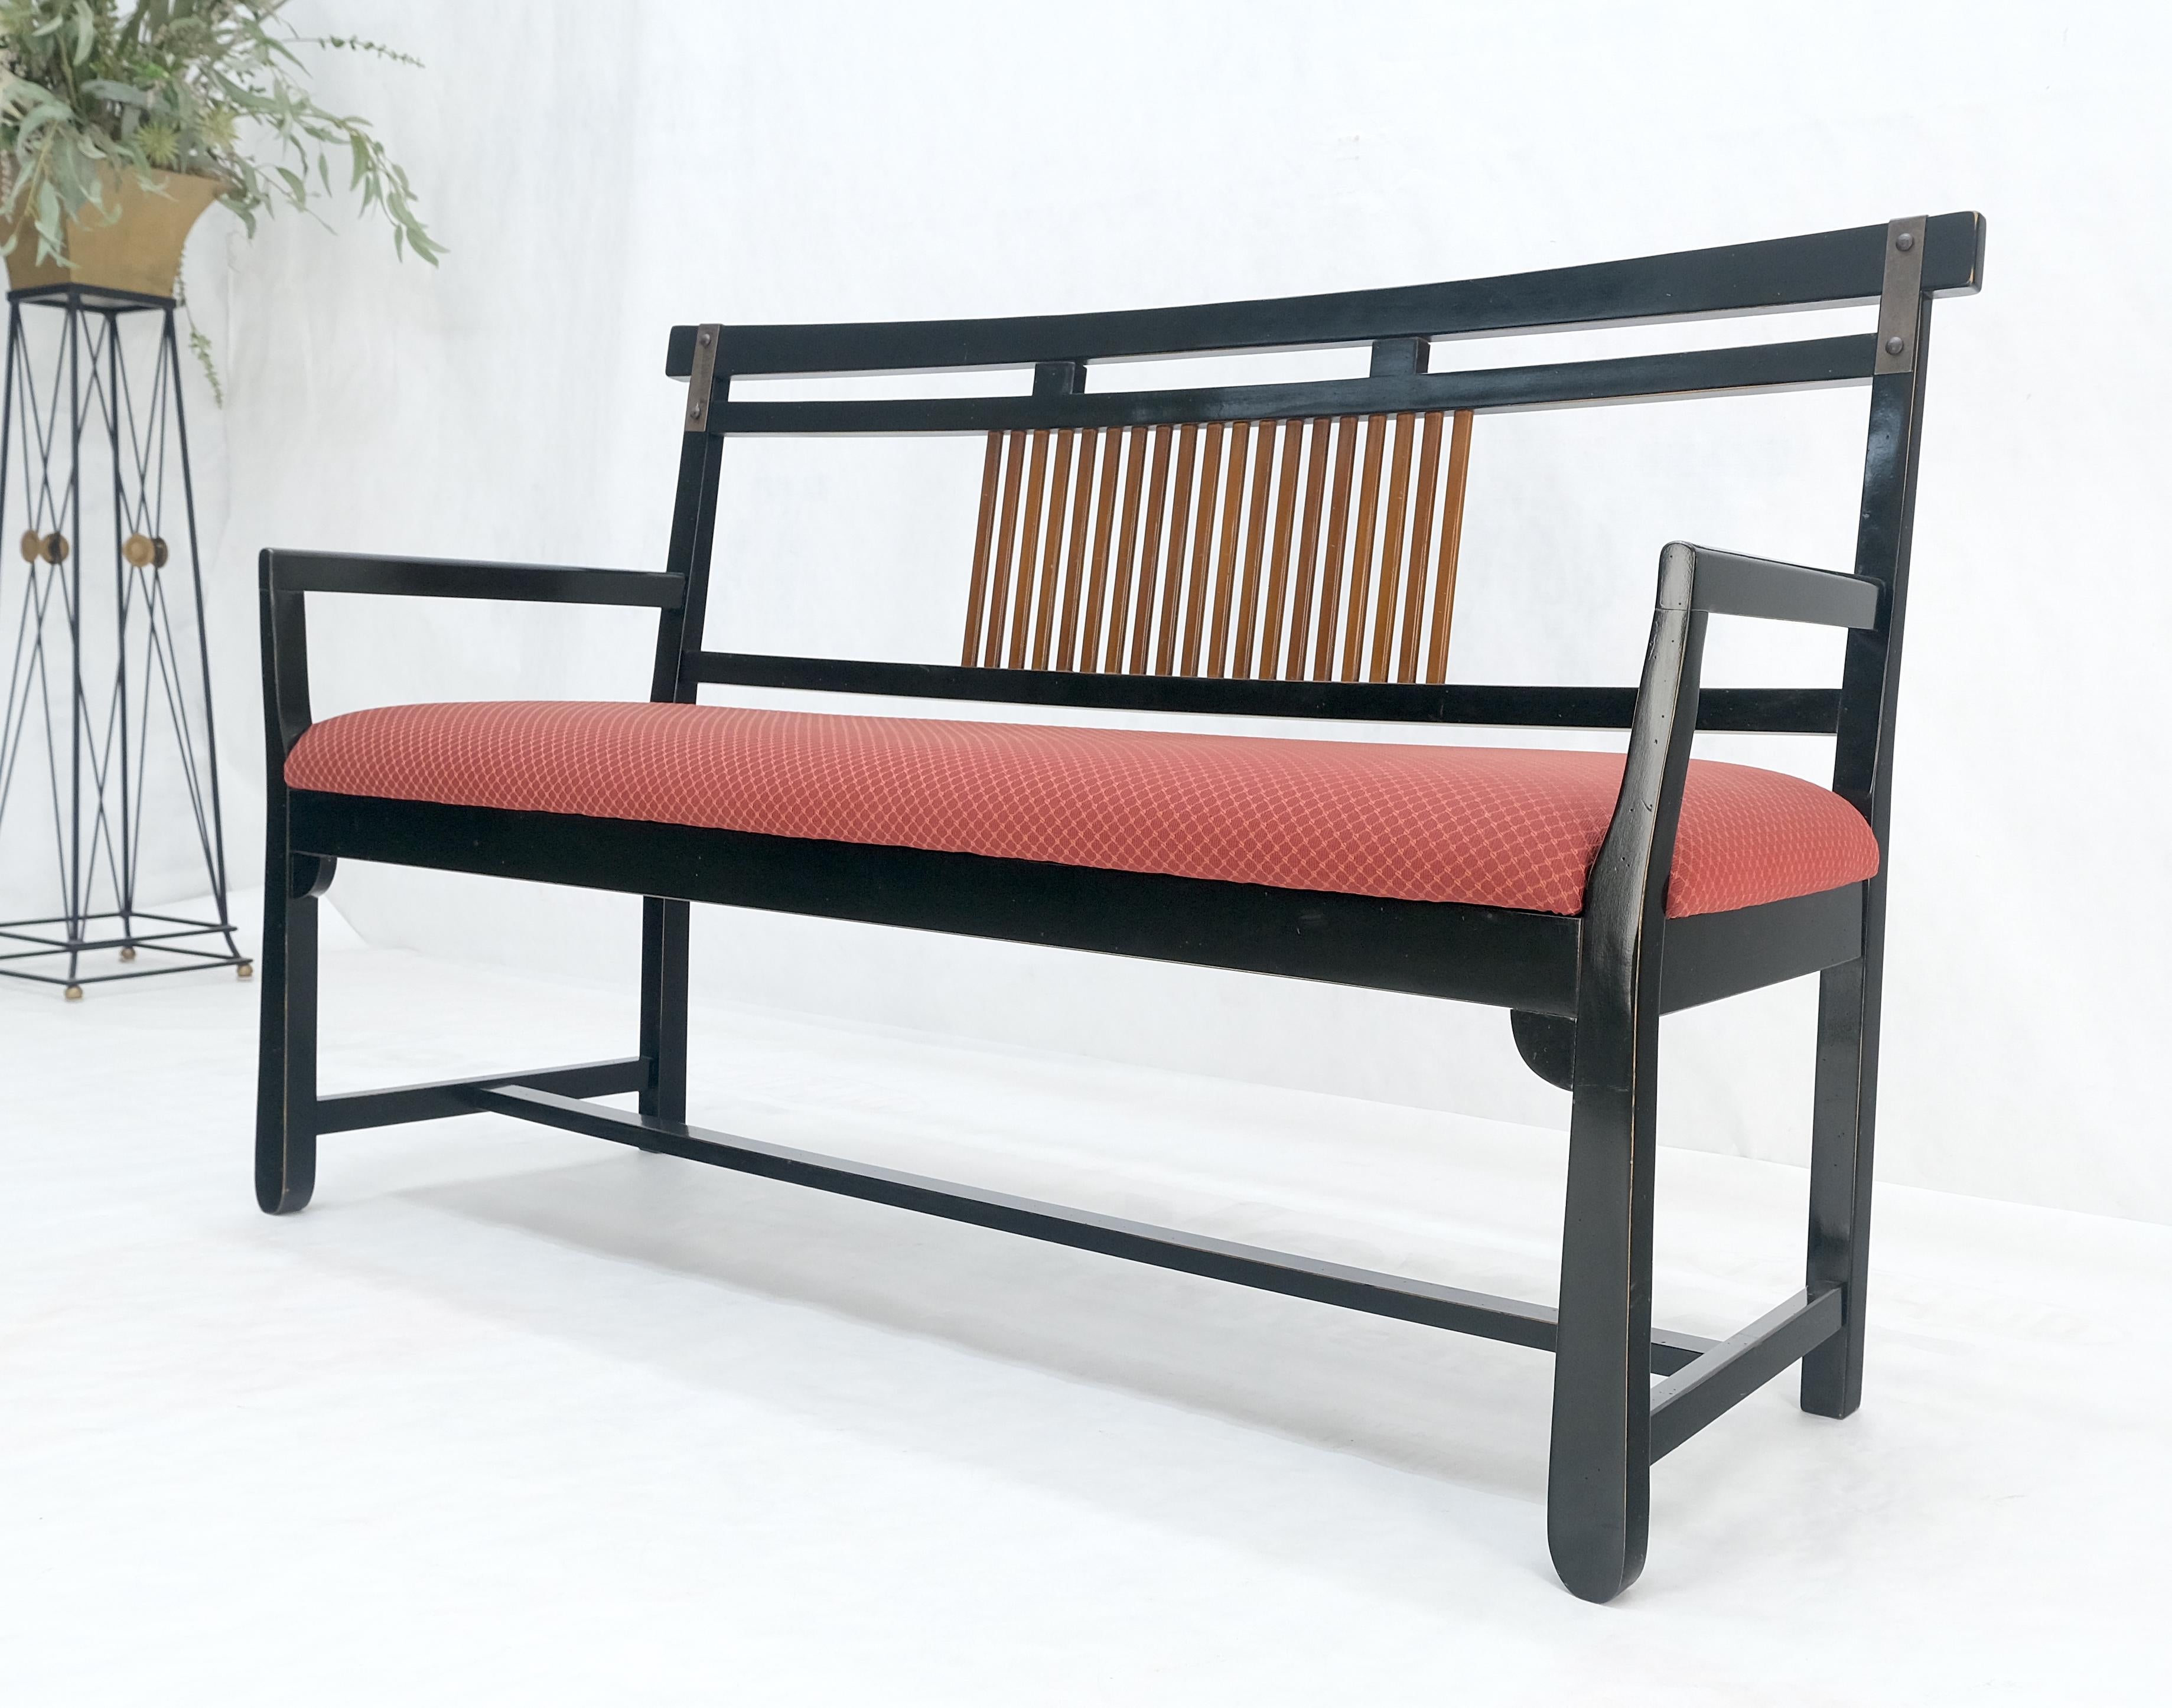 20th Century Vintage Black Lacquer Red Upholstery Bench w/ Arms Slotted Back MINT For Sale